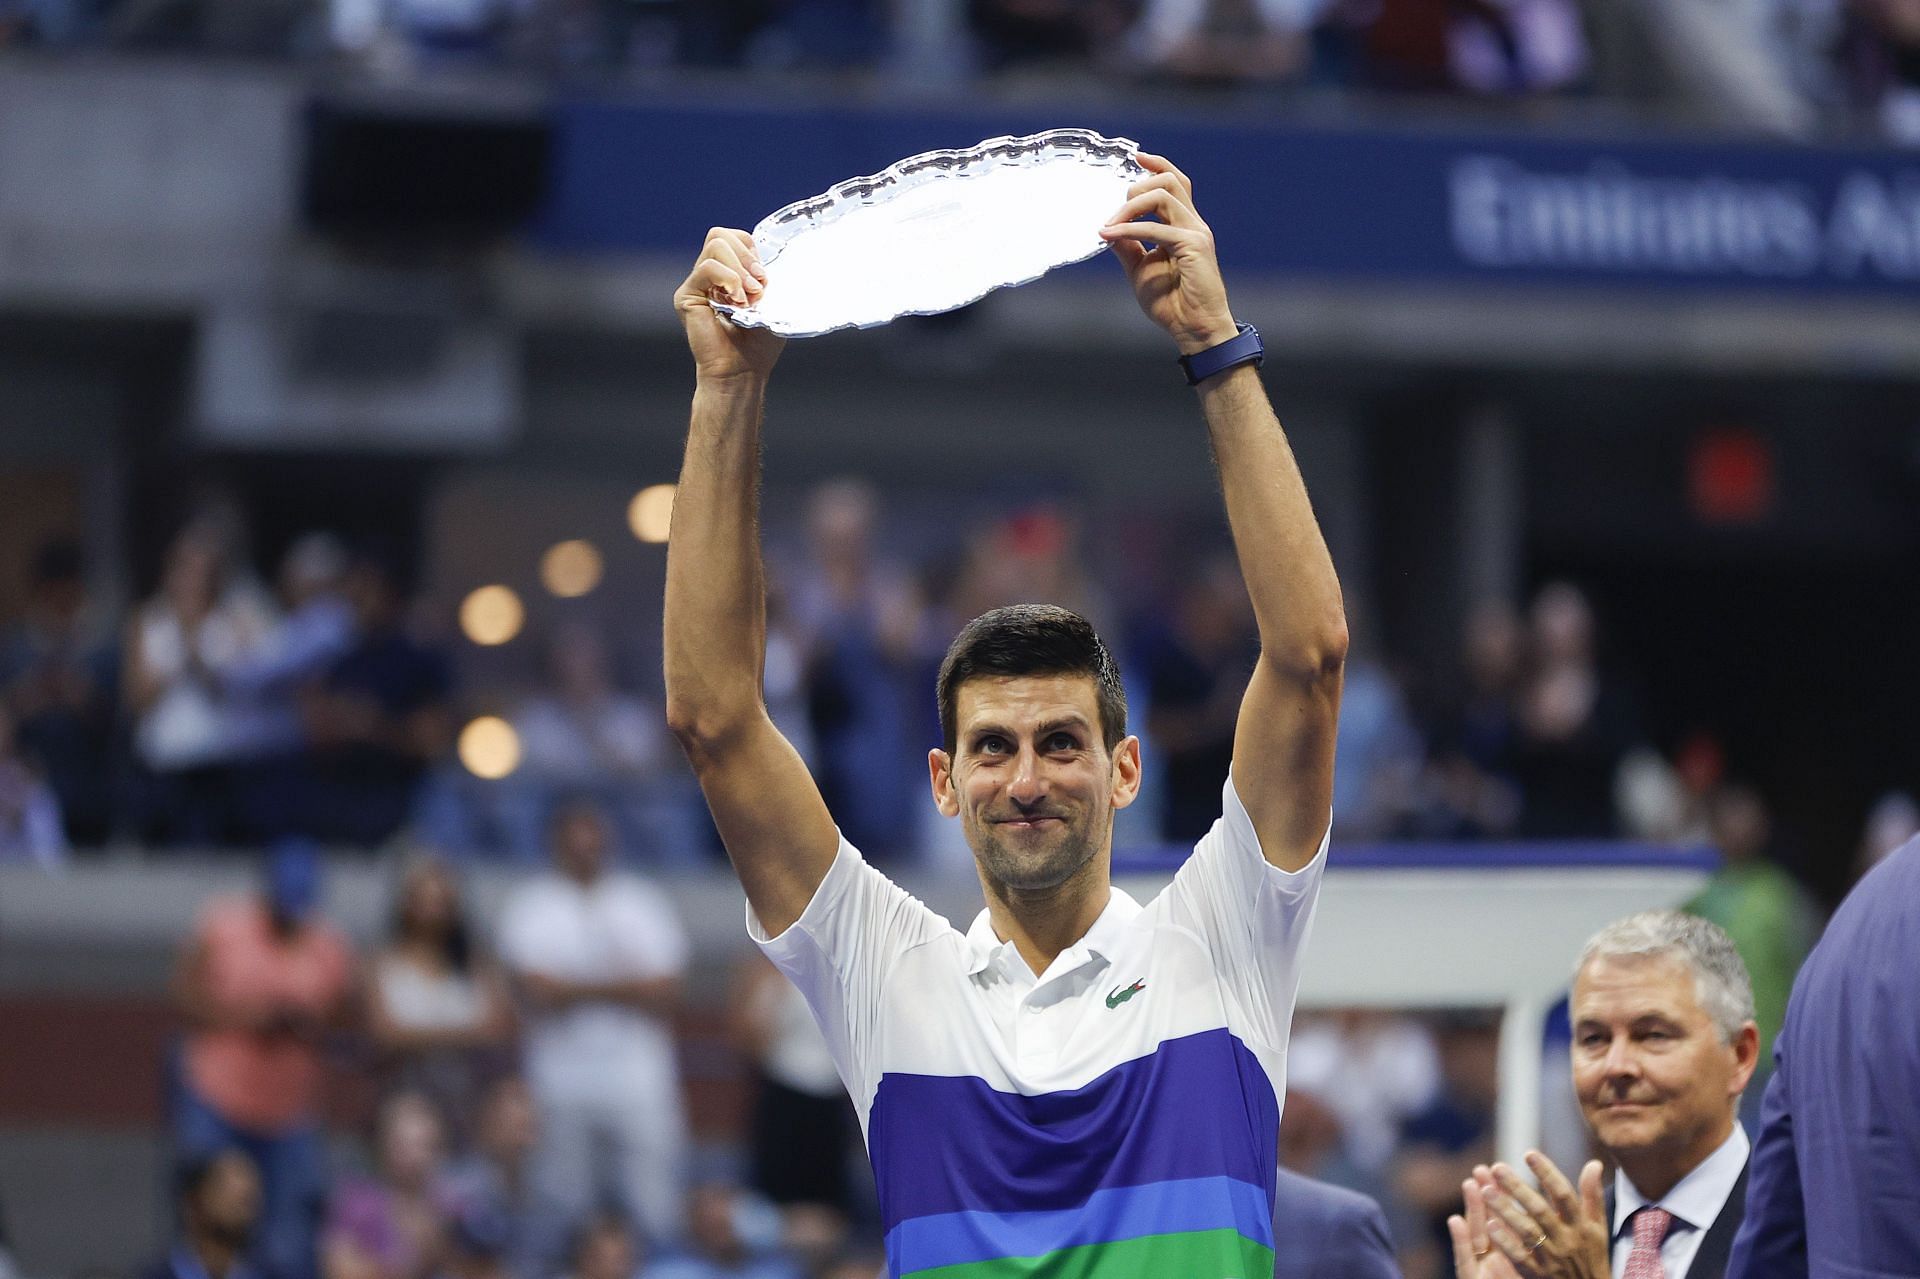 Novak Djokovic won his court case, successfully getting the cancelation of his visa revoked